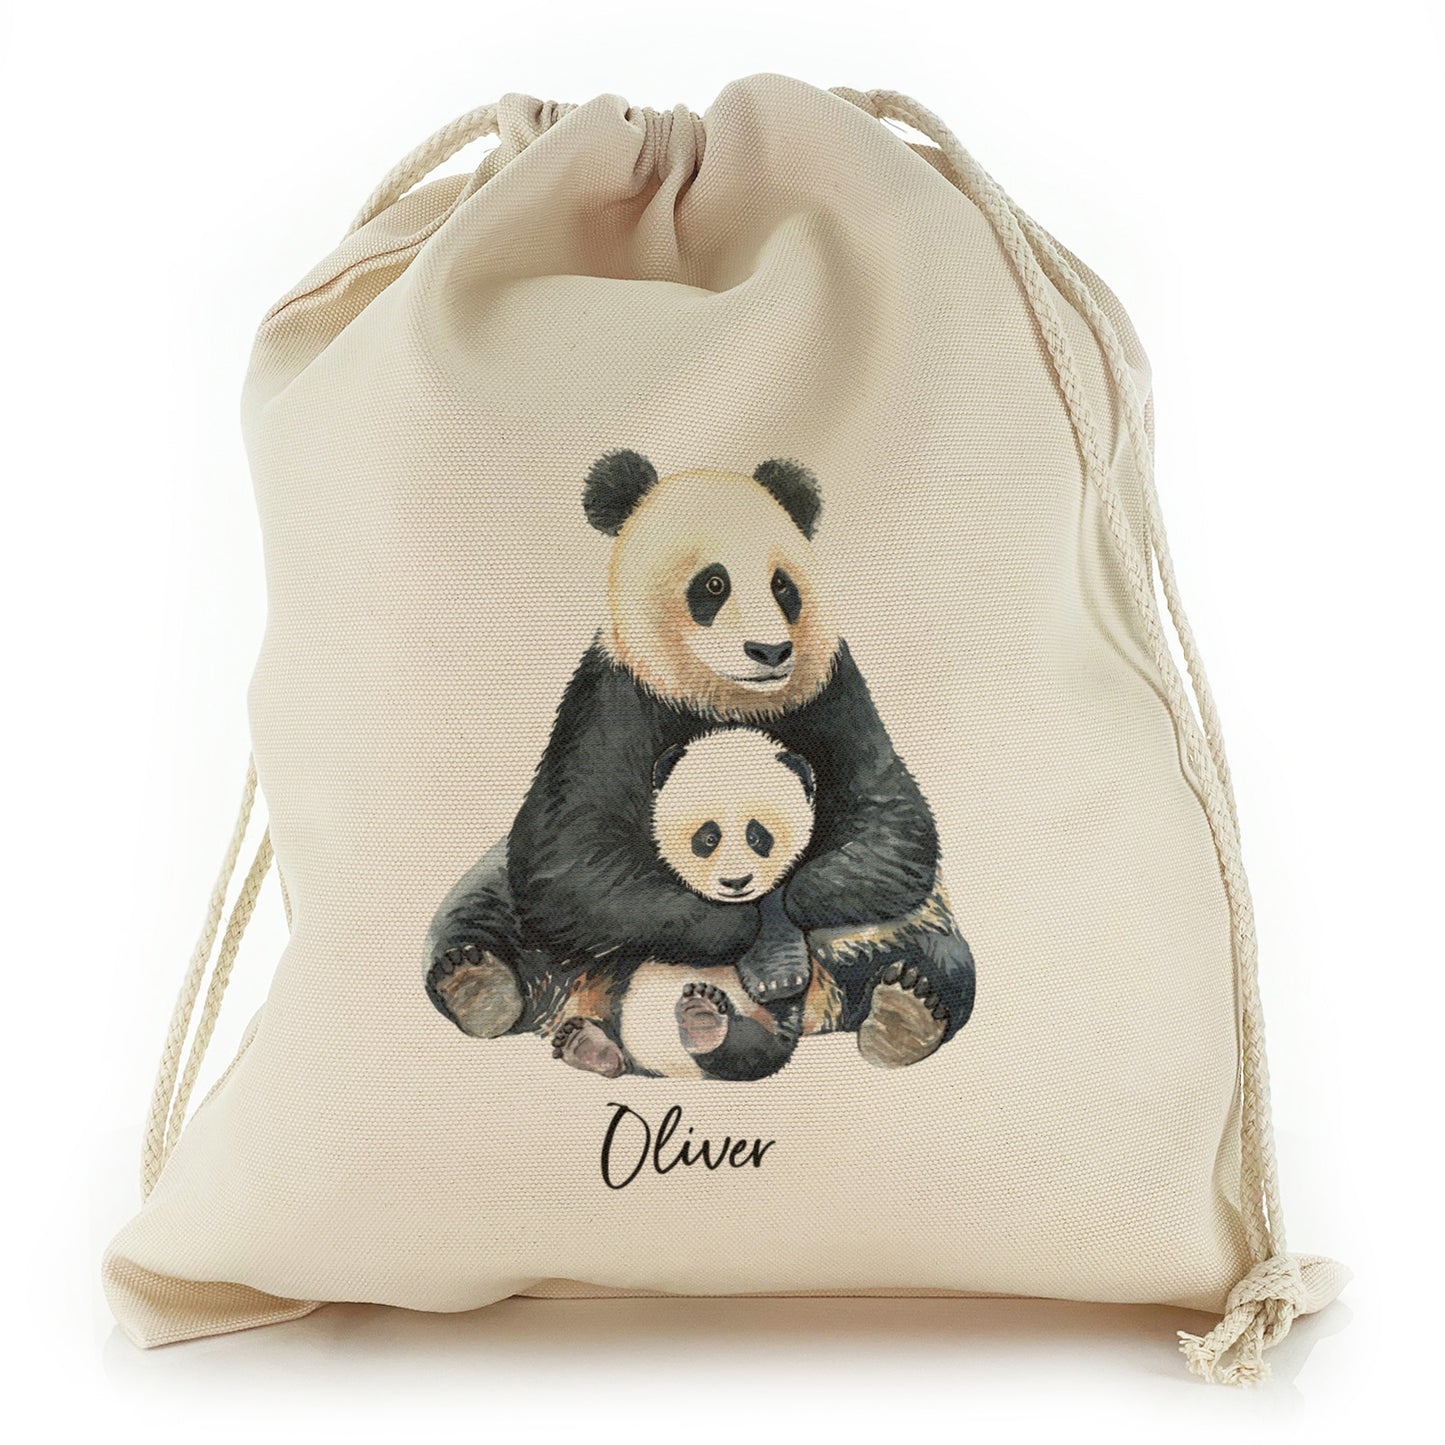 Personalised Canvas Sack with Welcoming Text and Relaxing Mum and Baby Pandas